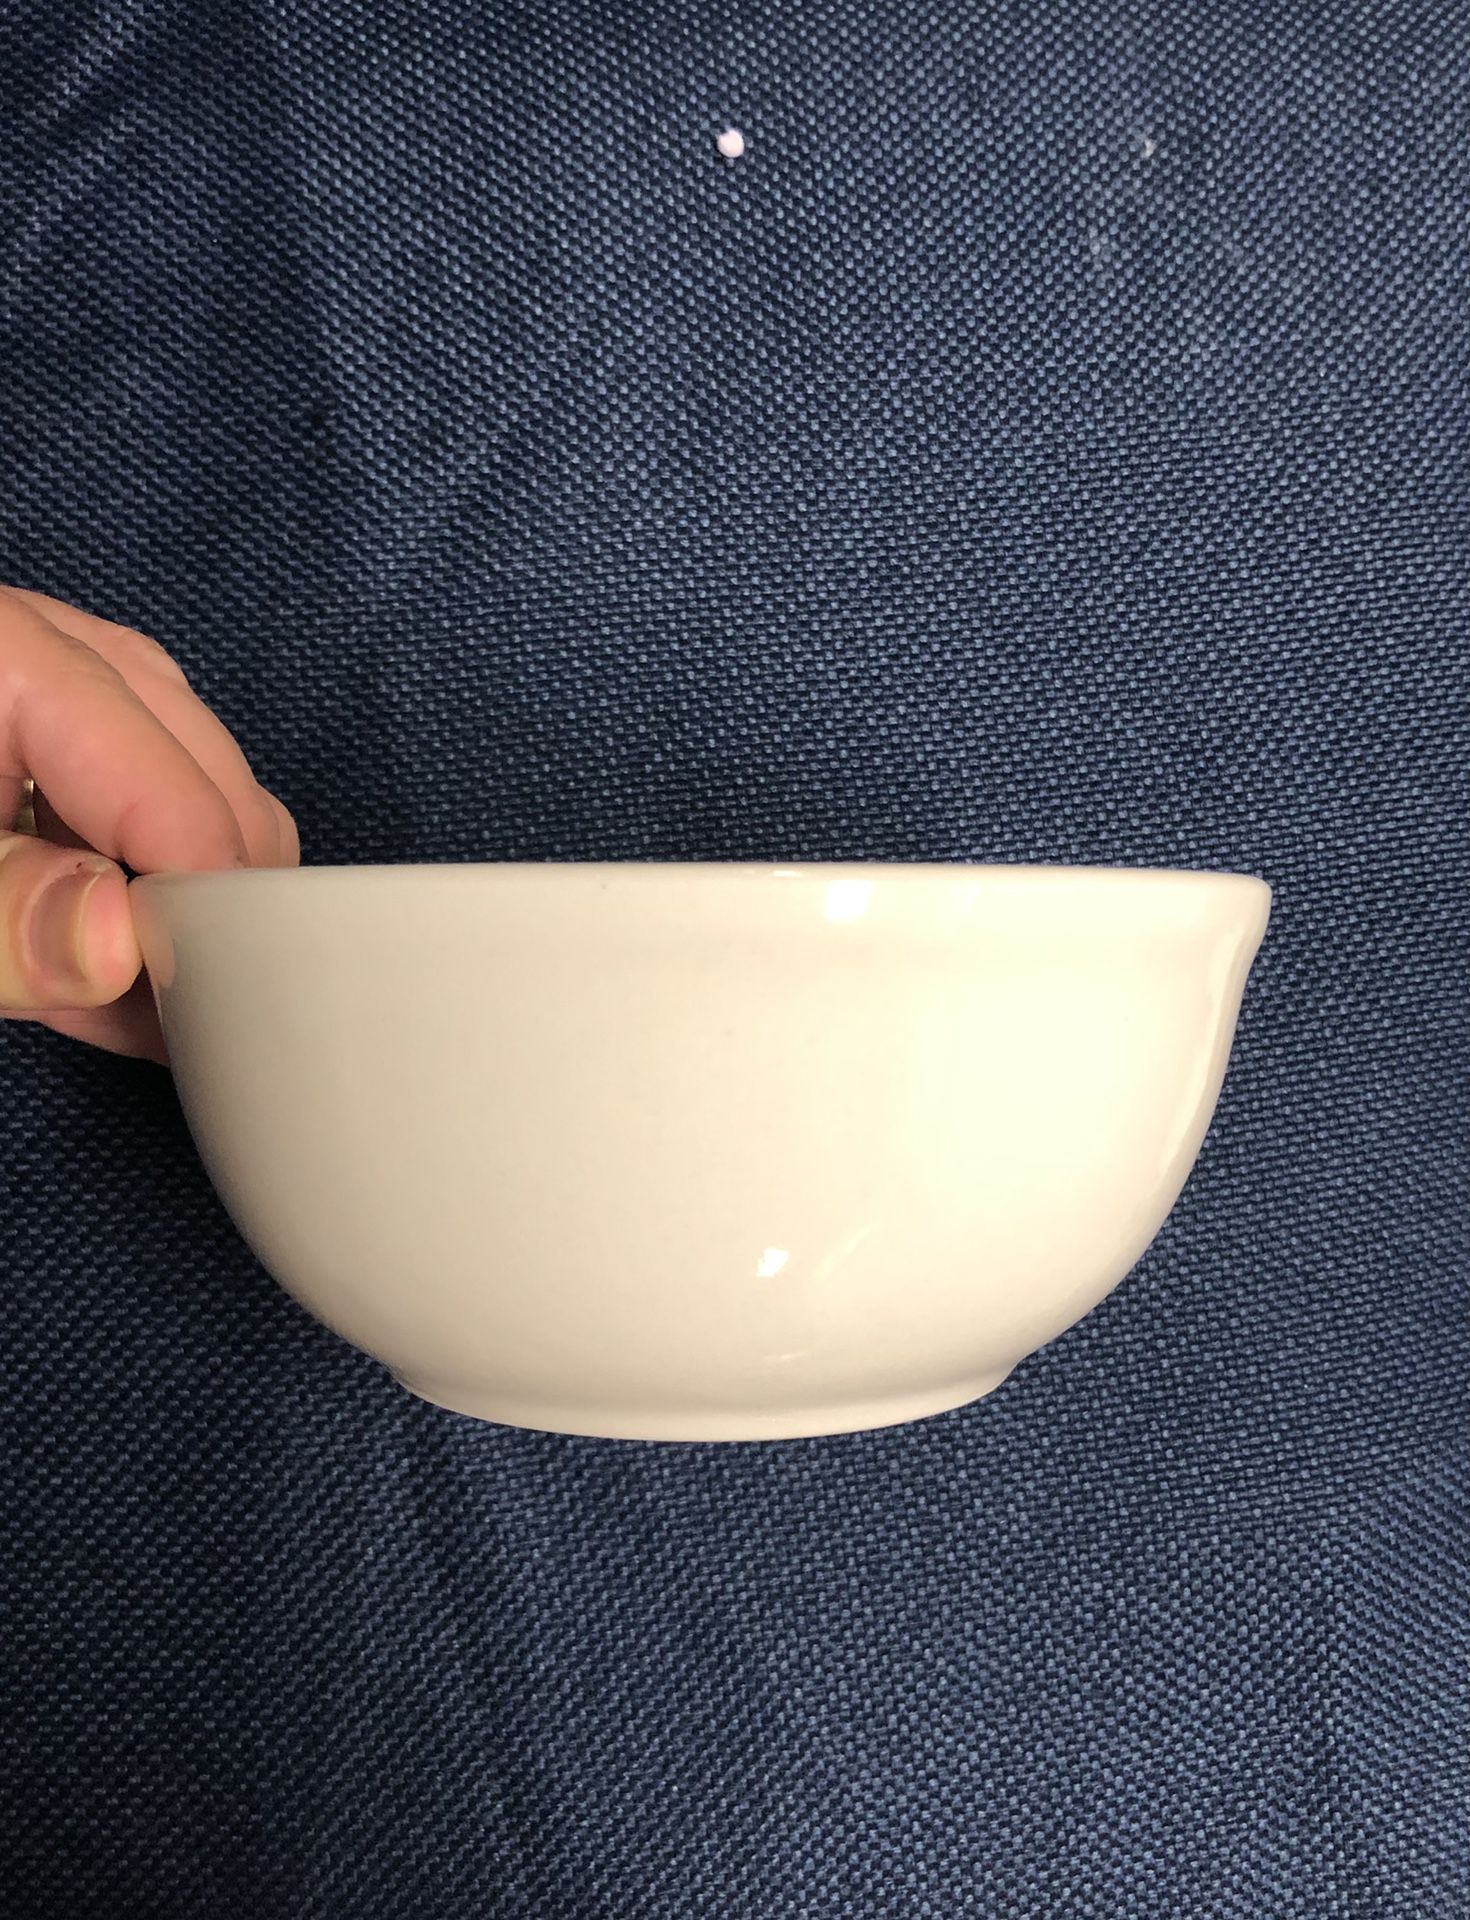 The Empire Collection bowls